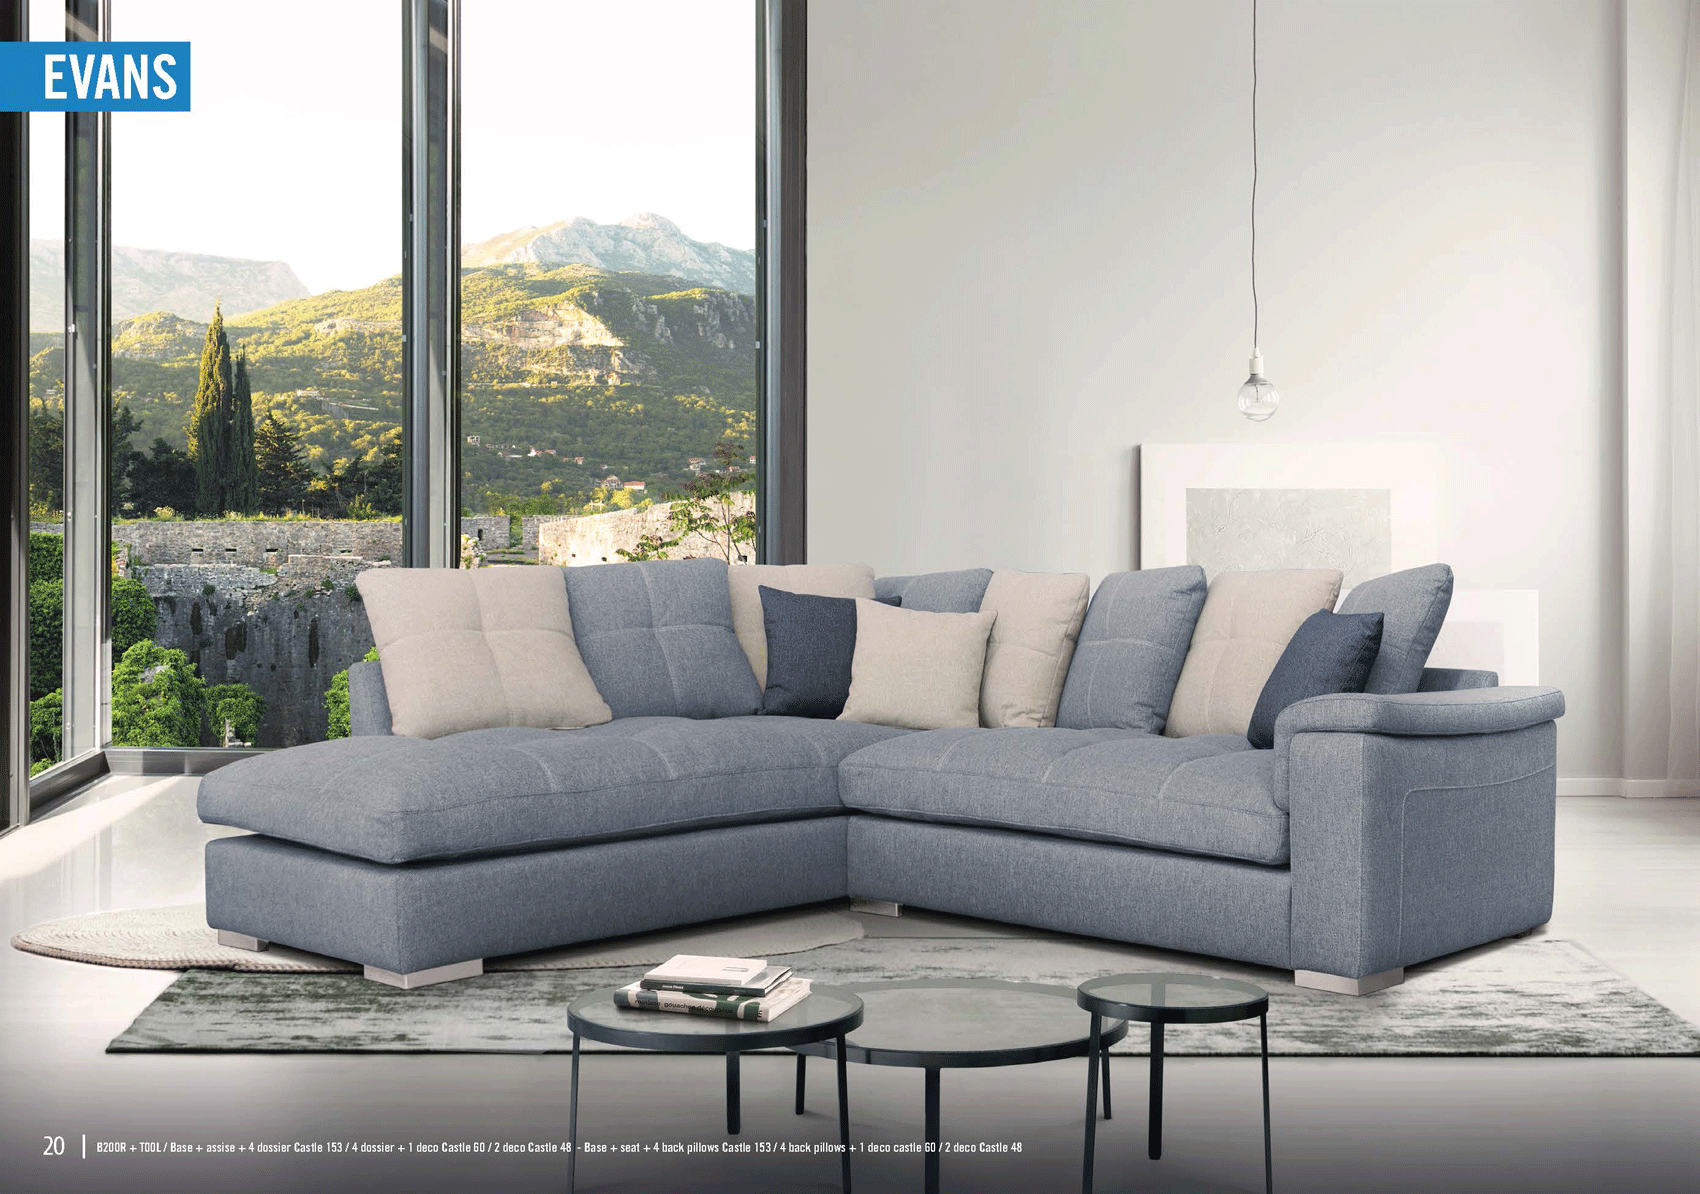 Brands European Living Collection Evans Sectional